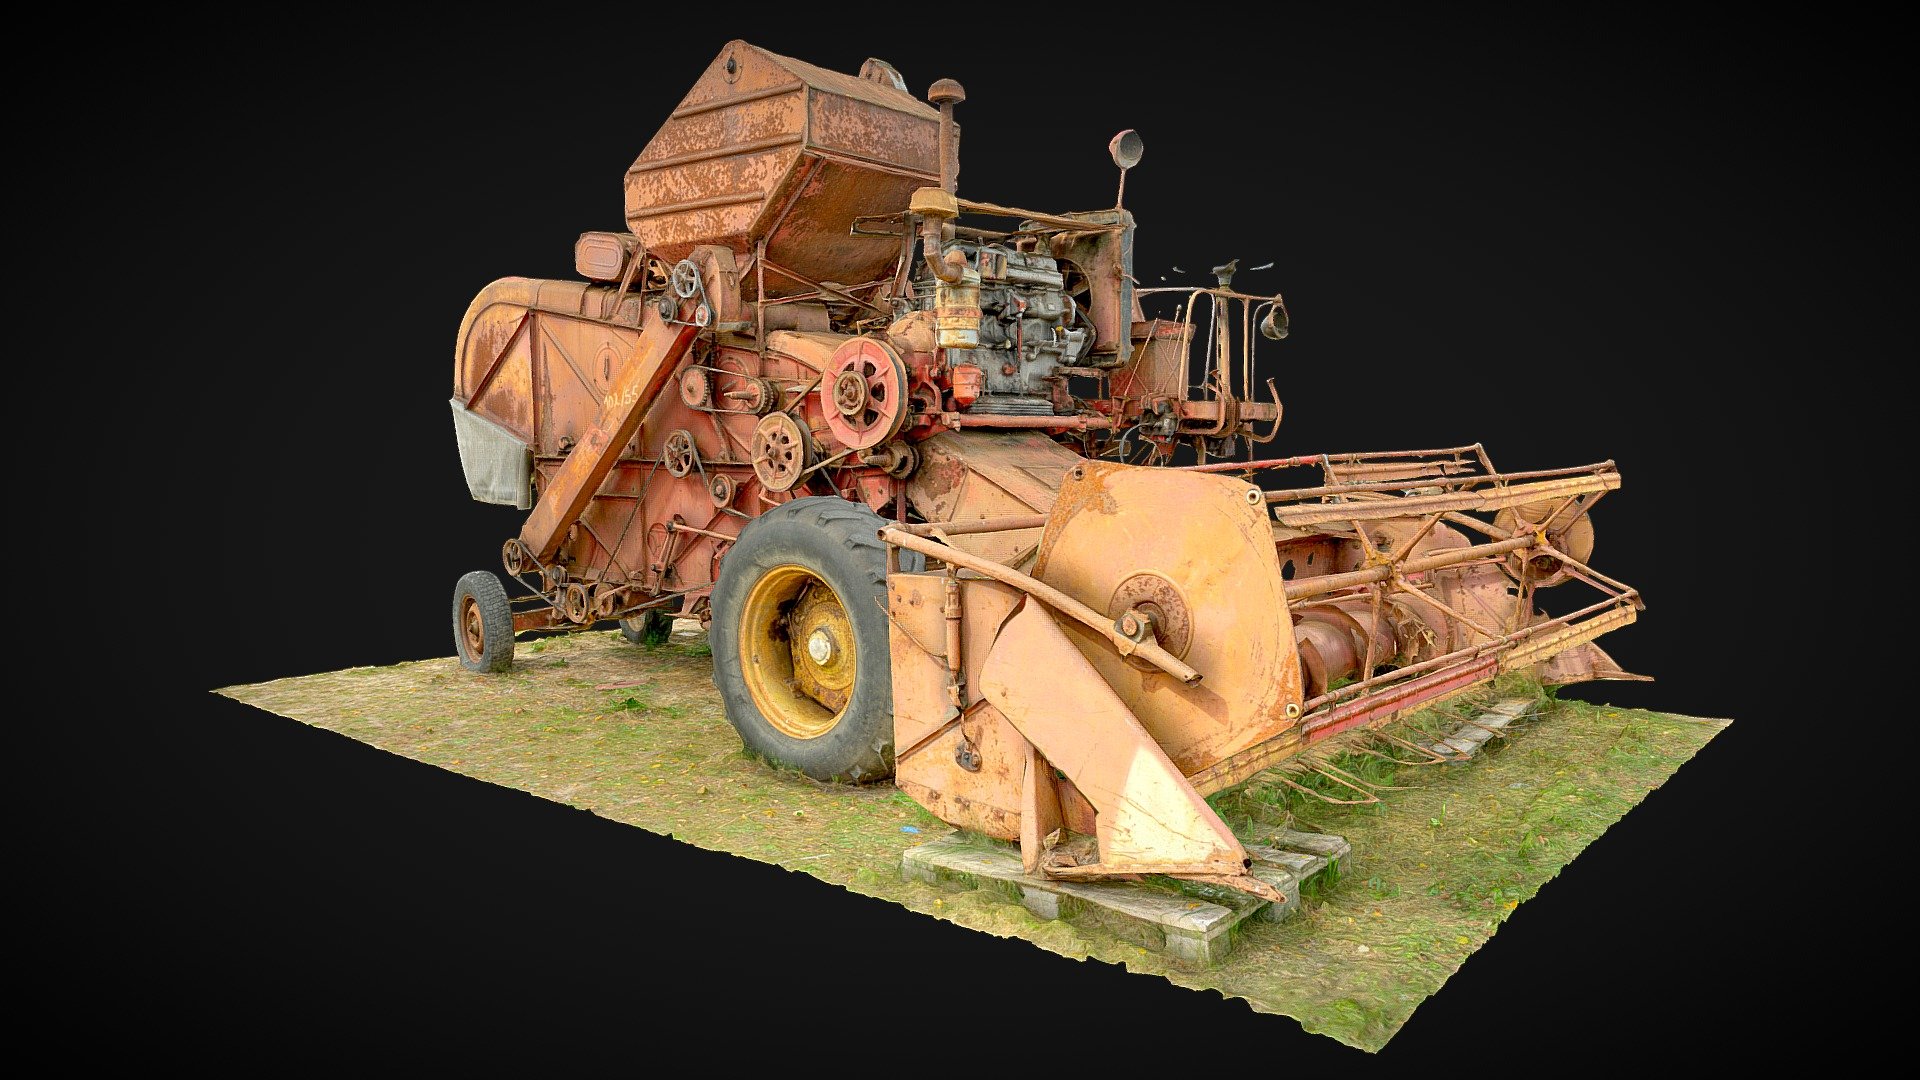 Old rusty combine harvester

Model 3D created in RC from 581 images (sony a6000, dji mini 3 pro)

Download version:

FBX Triangles: 300 K Textures: 5x8192x8192u1v1 jpg + normal

FBX Triangles: 1 mln Textures: 5x8192x8192u1v1 jpg + normal

FBX Triangles: 10 mln Textures: 6x8192x8192u1v1 jpg + normal

All normal maps generated from 3D model with 40 mln triangles.

If you need re-exporting or are interested in source images, please email me.

If you like my work leave a like or comment and follow me for more! Thanks :)









 - Old rusty combine harvester - Buy Royalty Free 3D model by archiwum_xyz 3d model